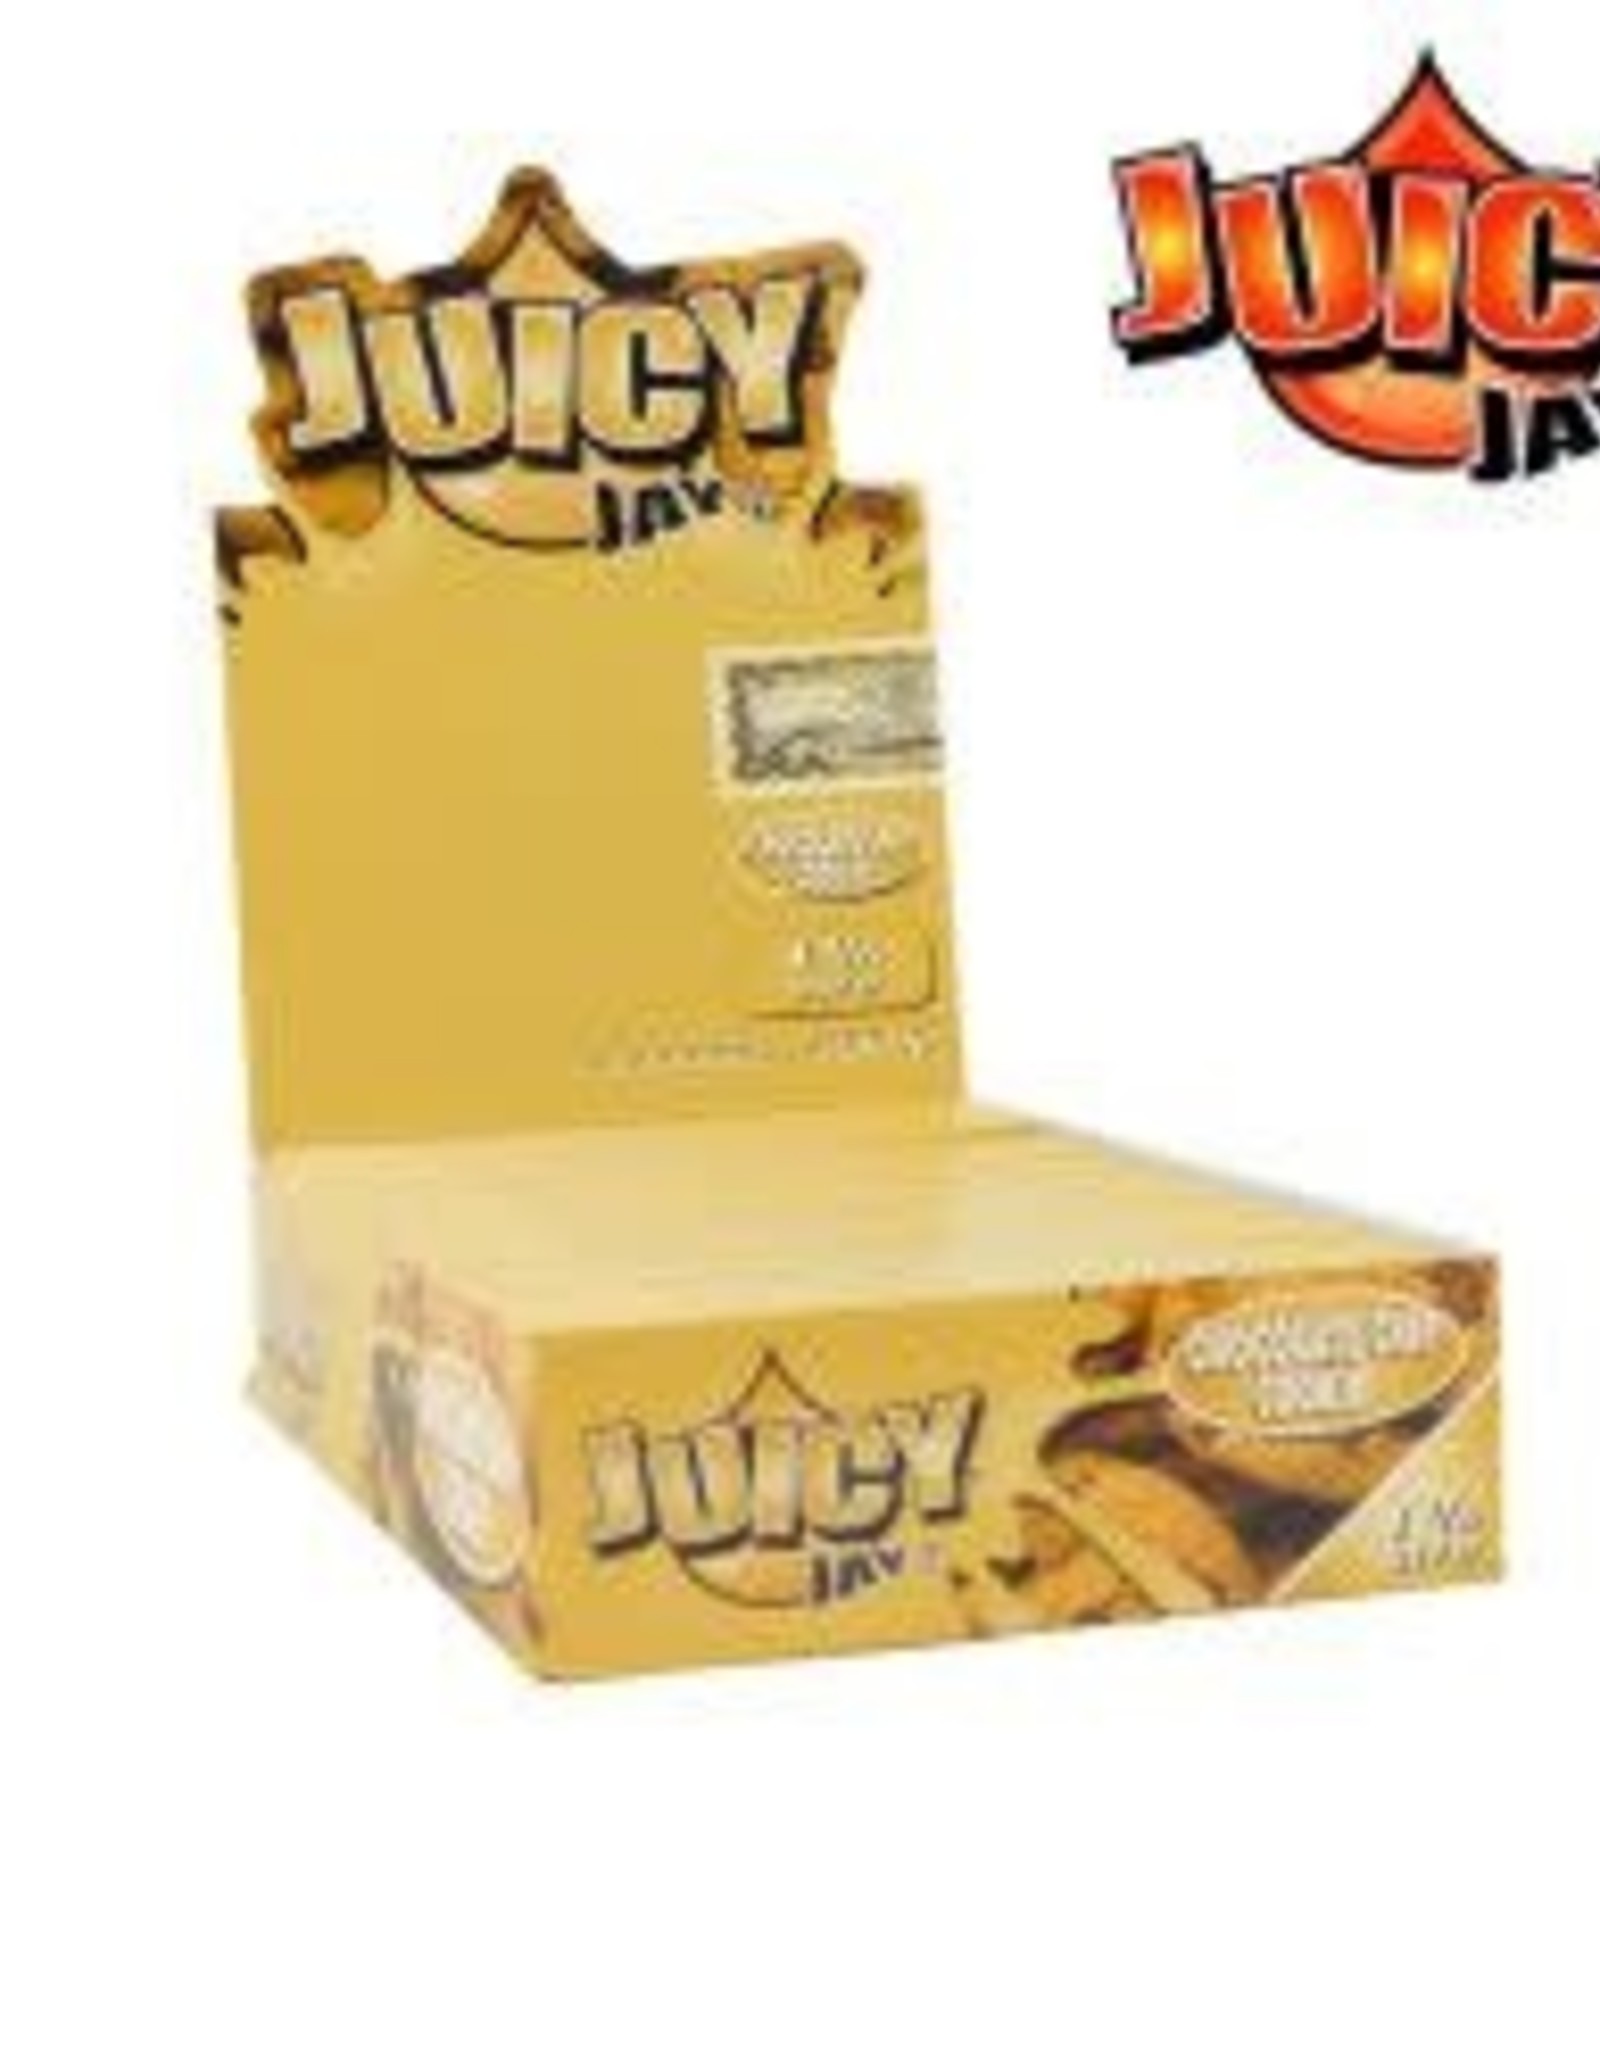 Juicy Jays's JUICY JAY'S ROLLING PAPERS 32 PK 1 1/4 Size COOKIE